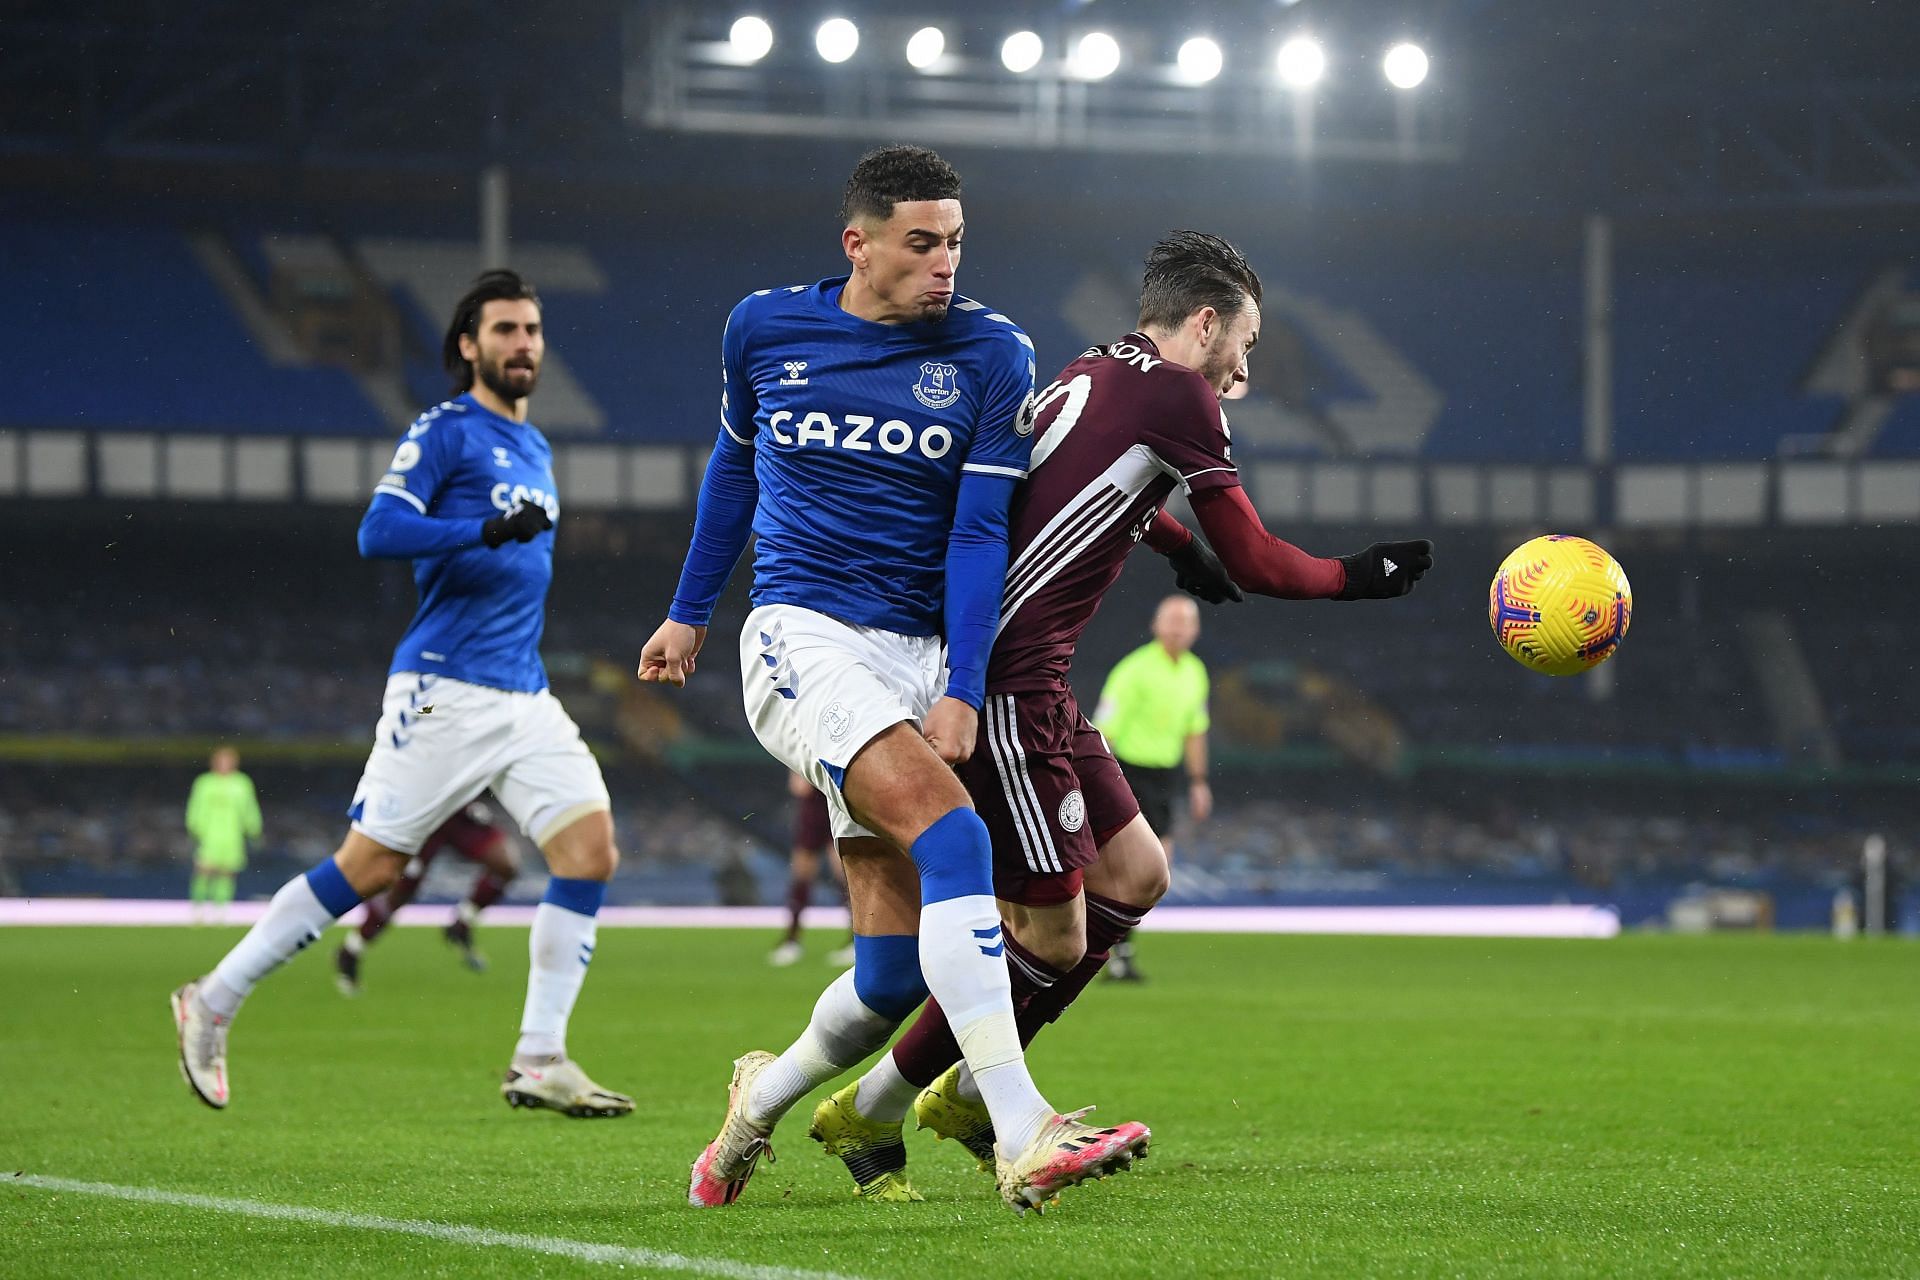 Everton vs Leicester City Prediction and Betting Tips - 11th January 2022